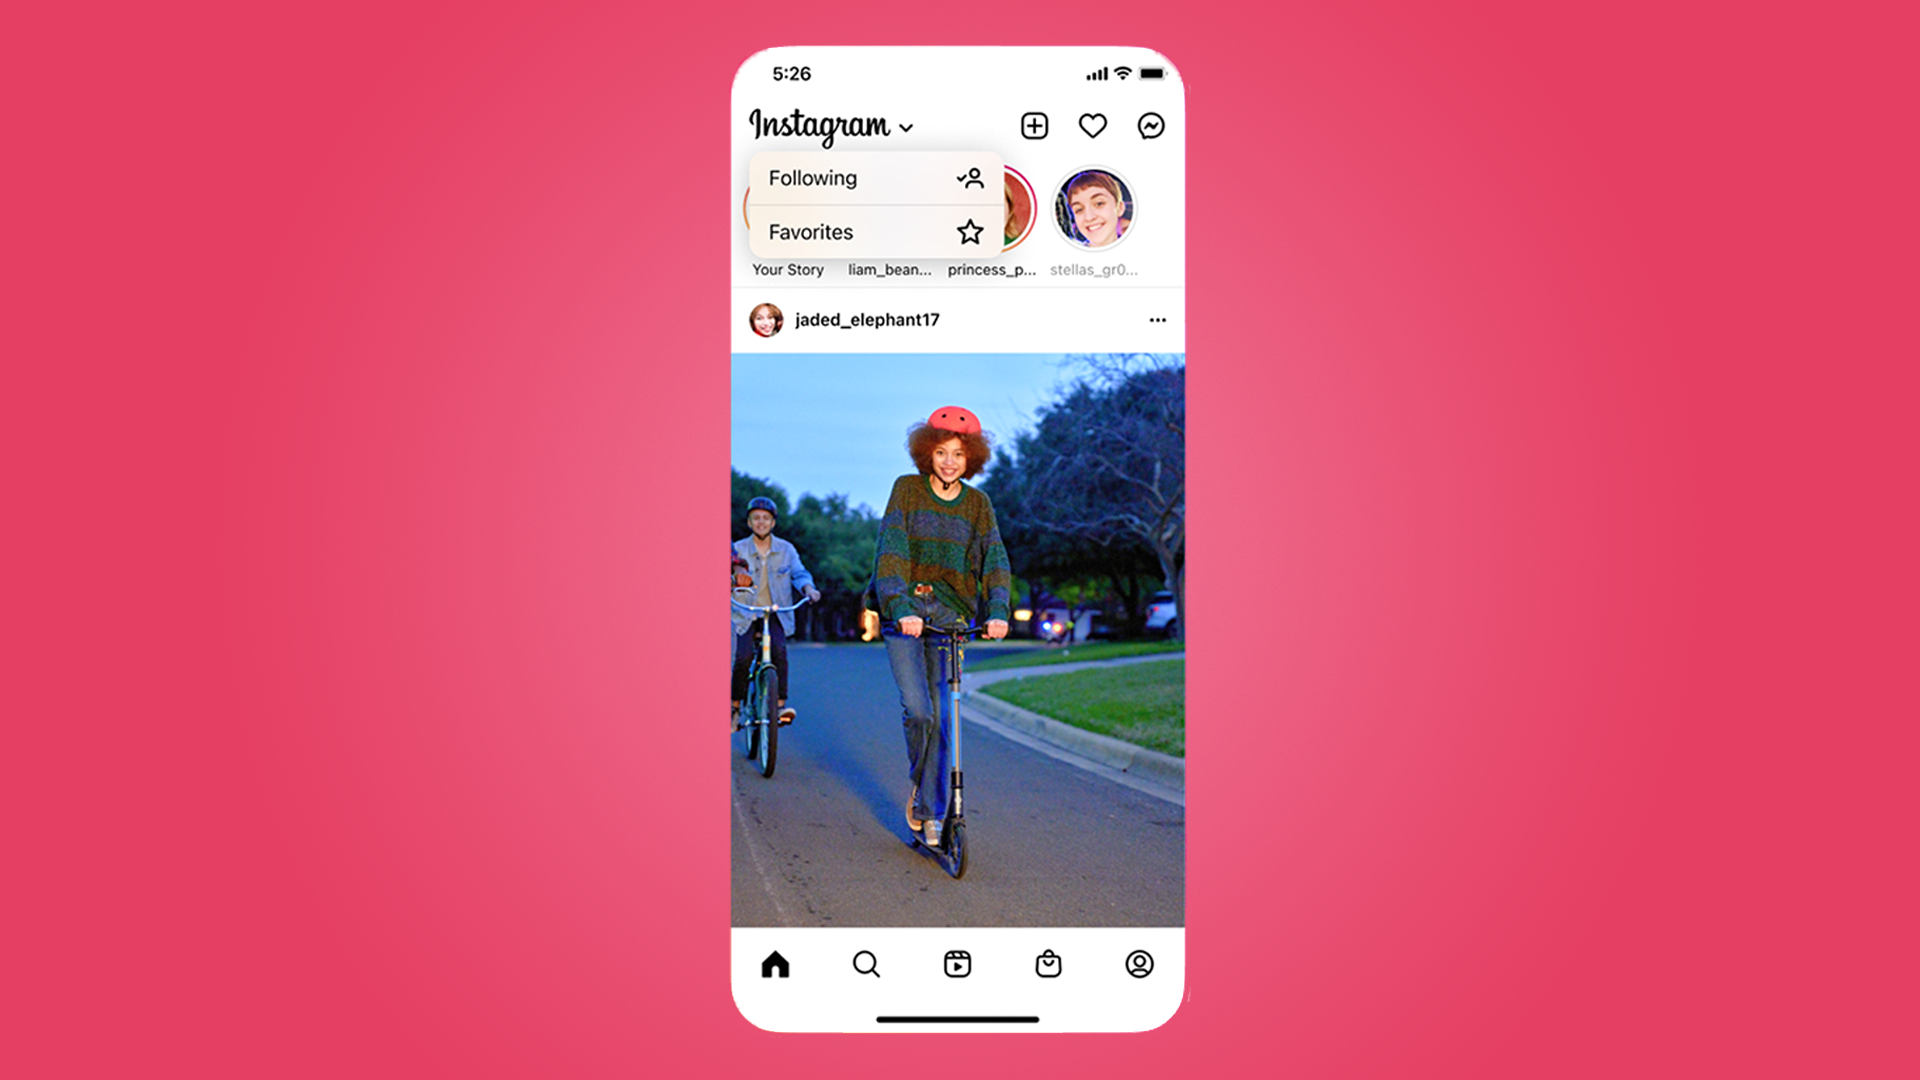 How to Get and Use Favorites Feed on Instagram (New Update) 